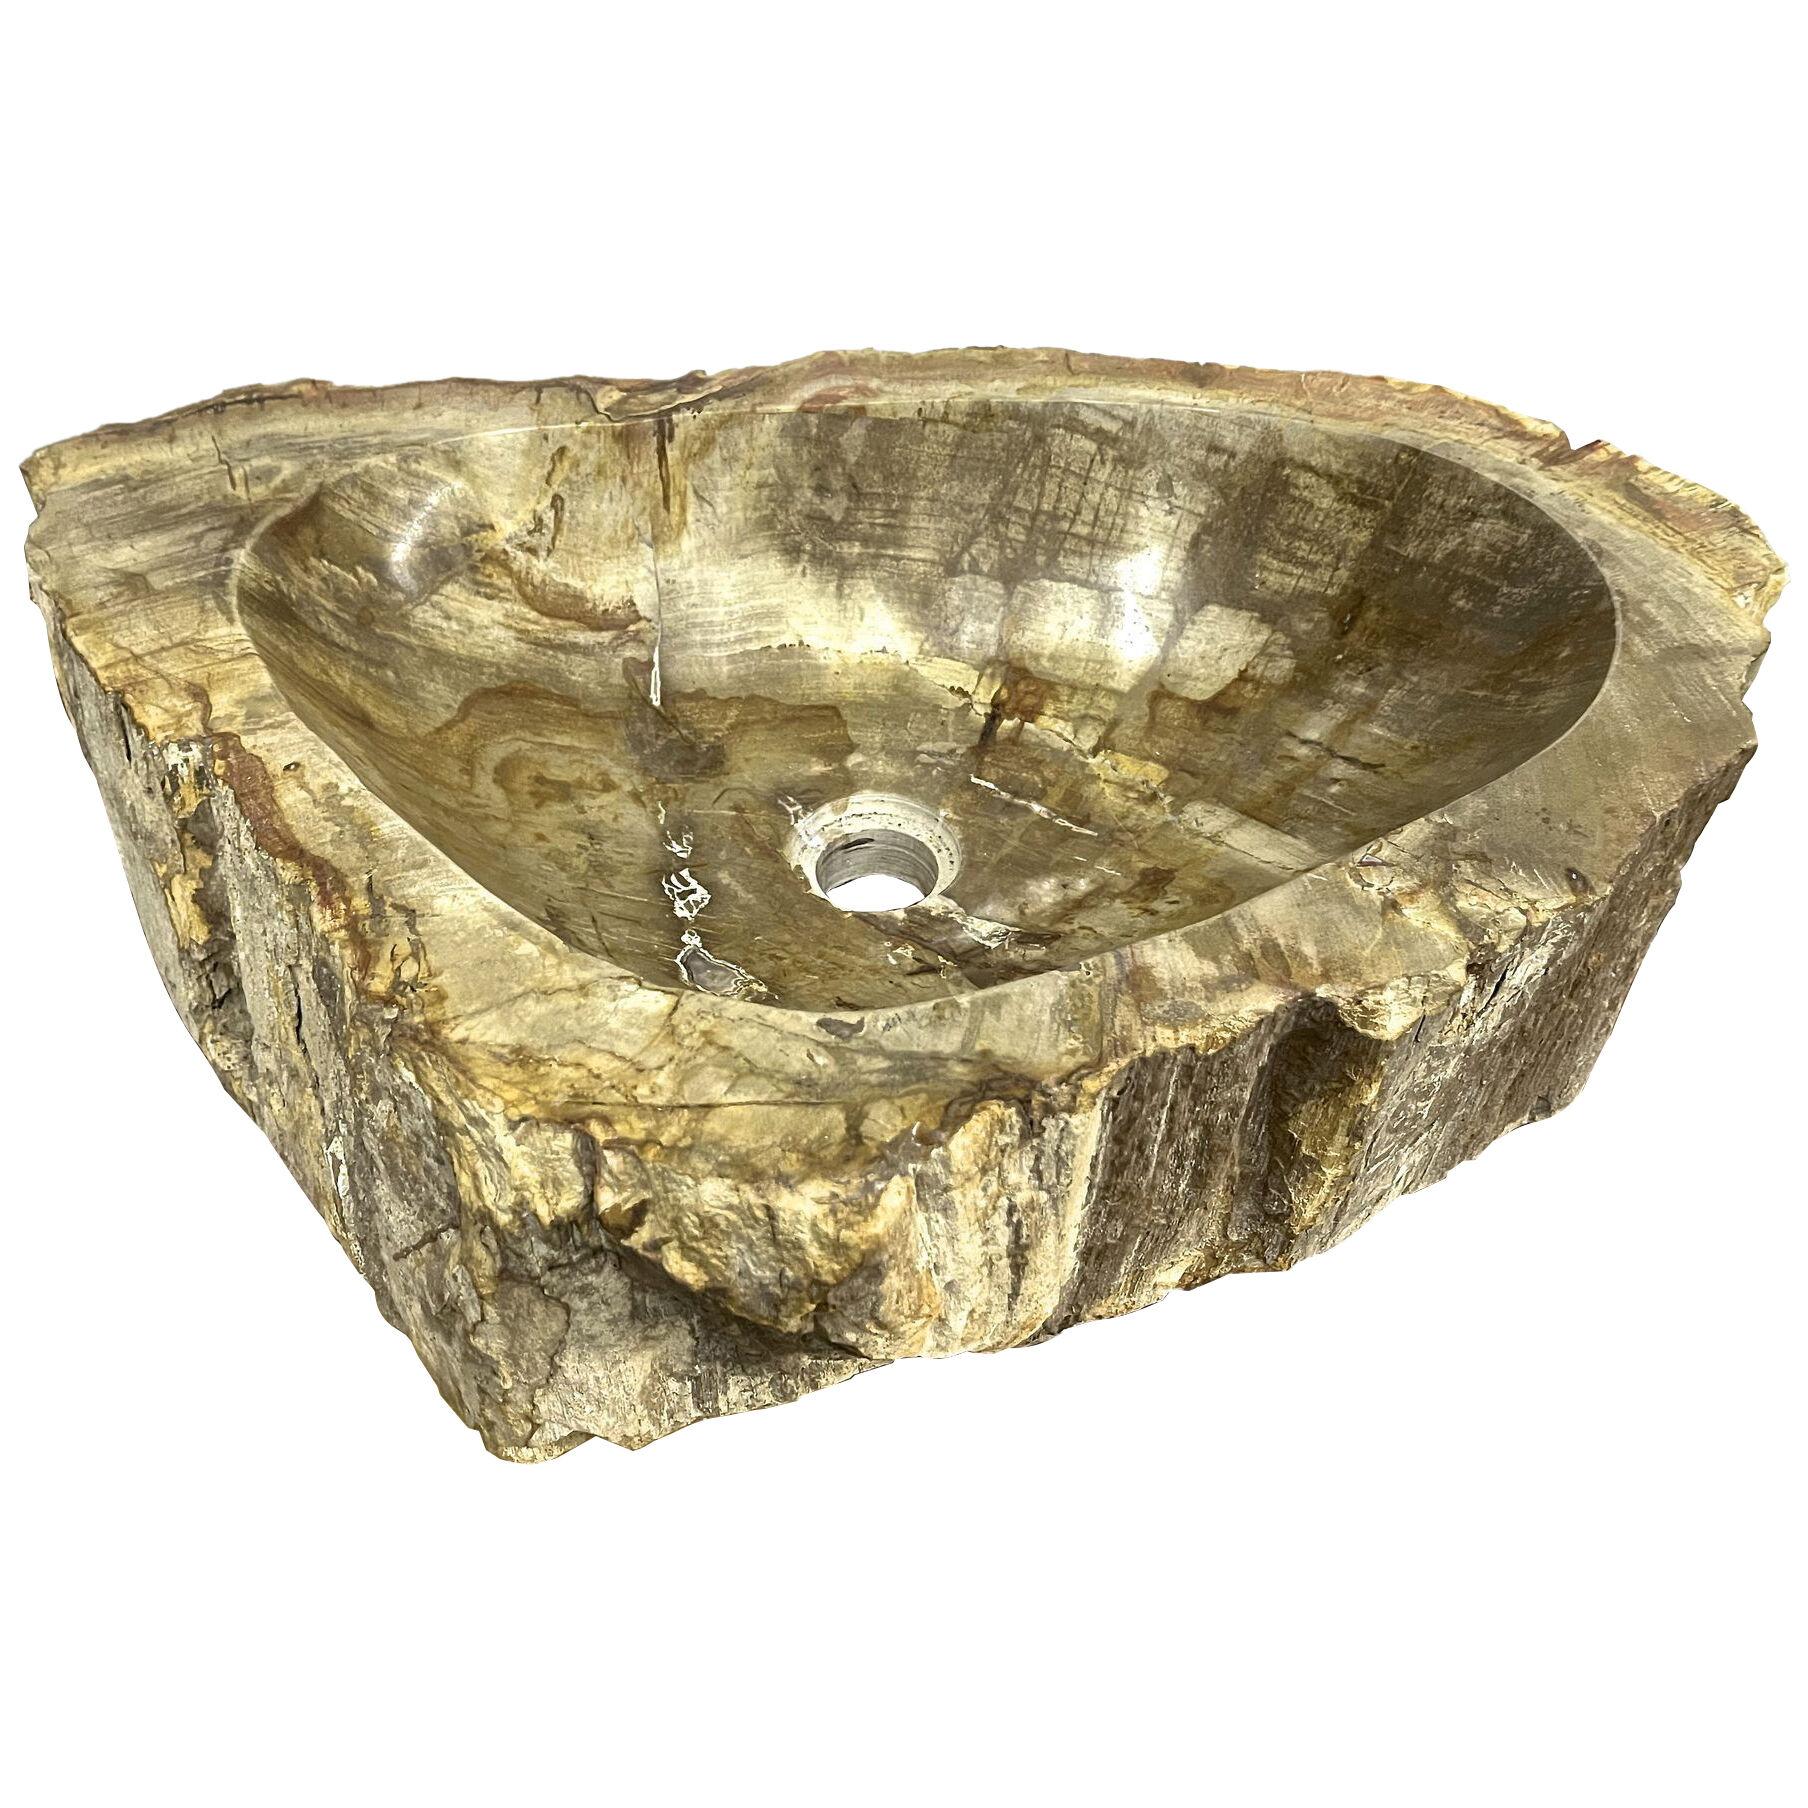 Petrified Wood Sink in Beige/ Yellow/ Brown Tones Polished, Top Quality